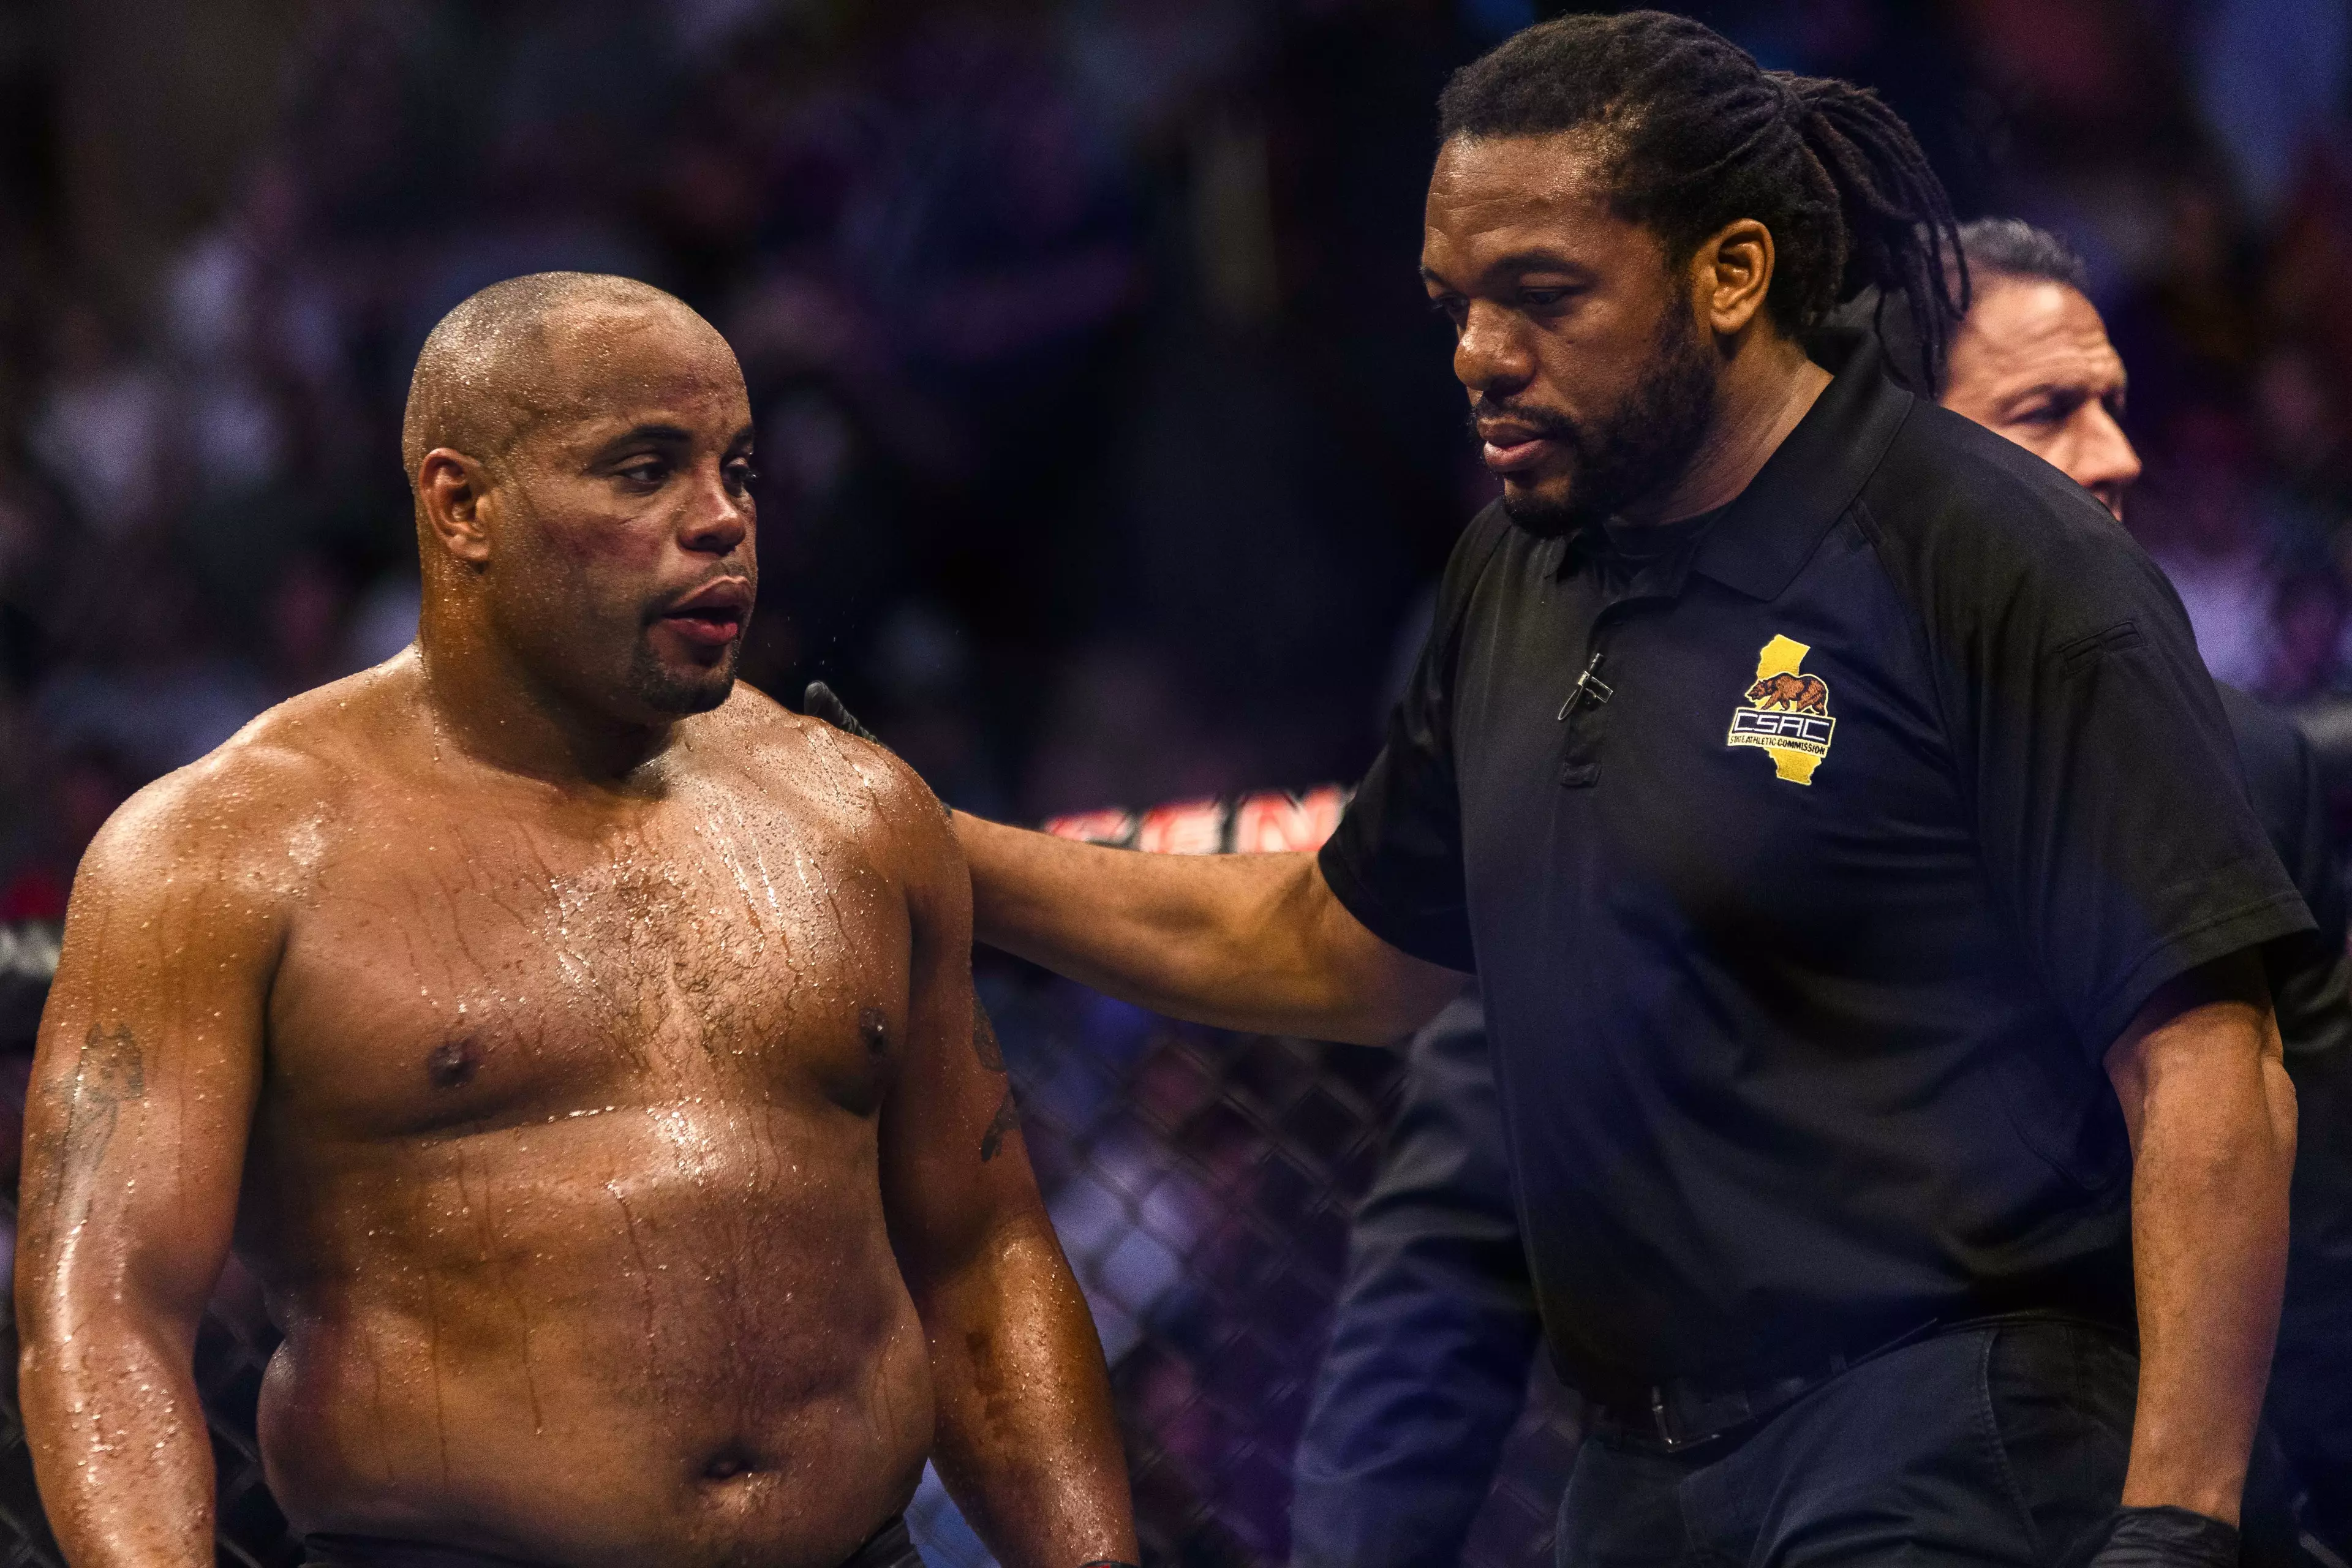 Daniel Cormier is considering retirement from UFC after his defeat by Stipe Miocic